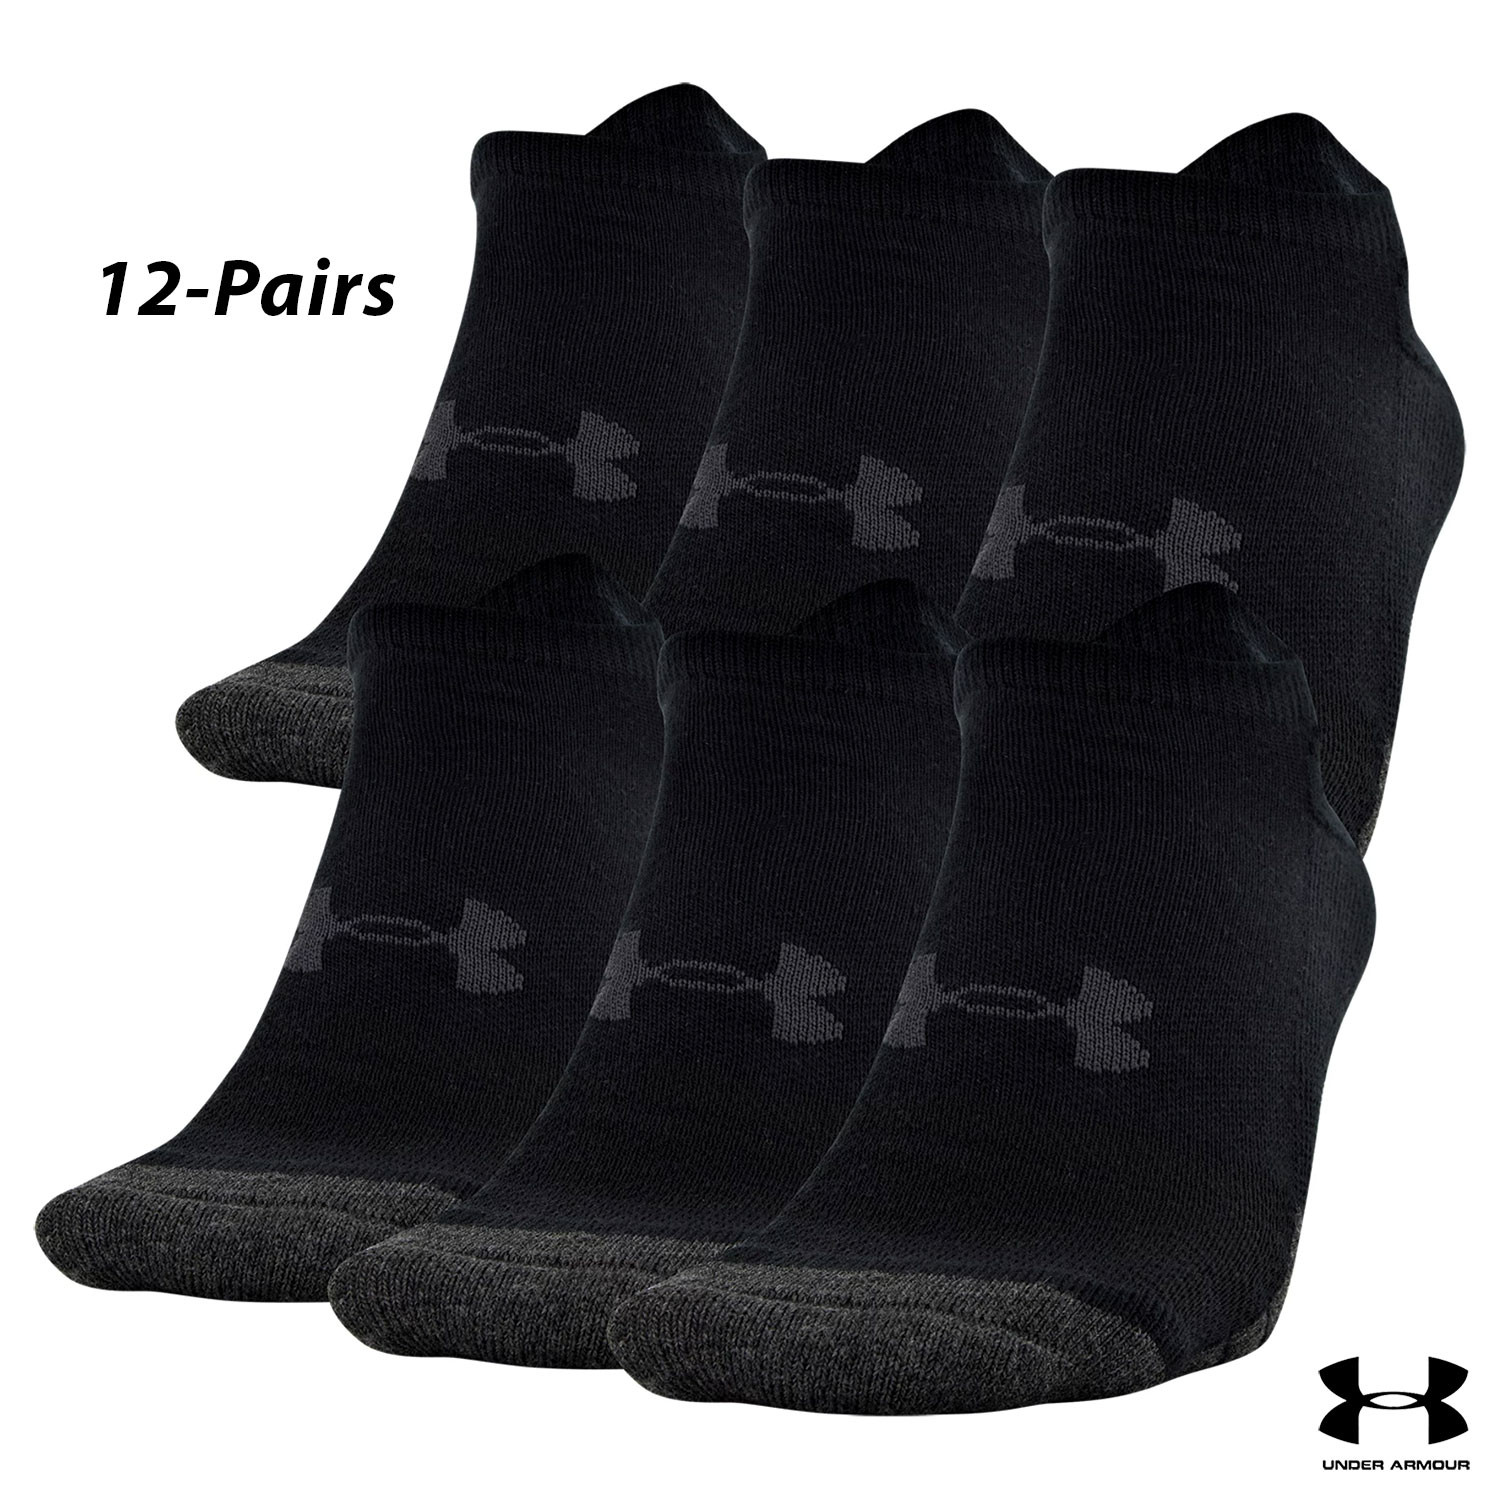 12-Pairs Under Armour Performance Tech No Show Socks (XL) $19.99 + Free Shipping